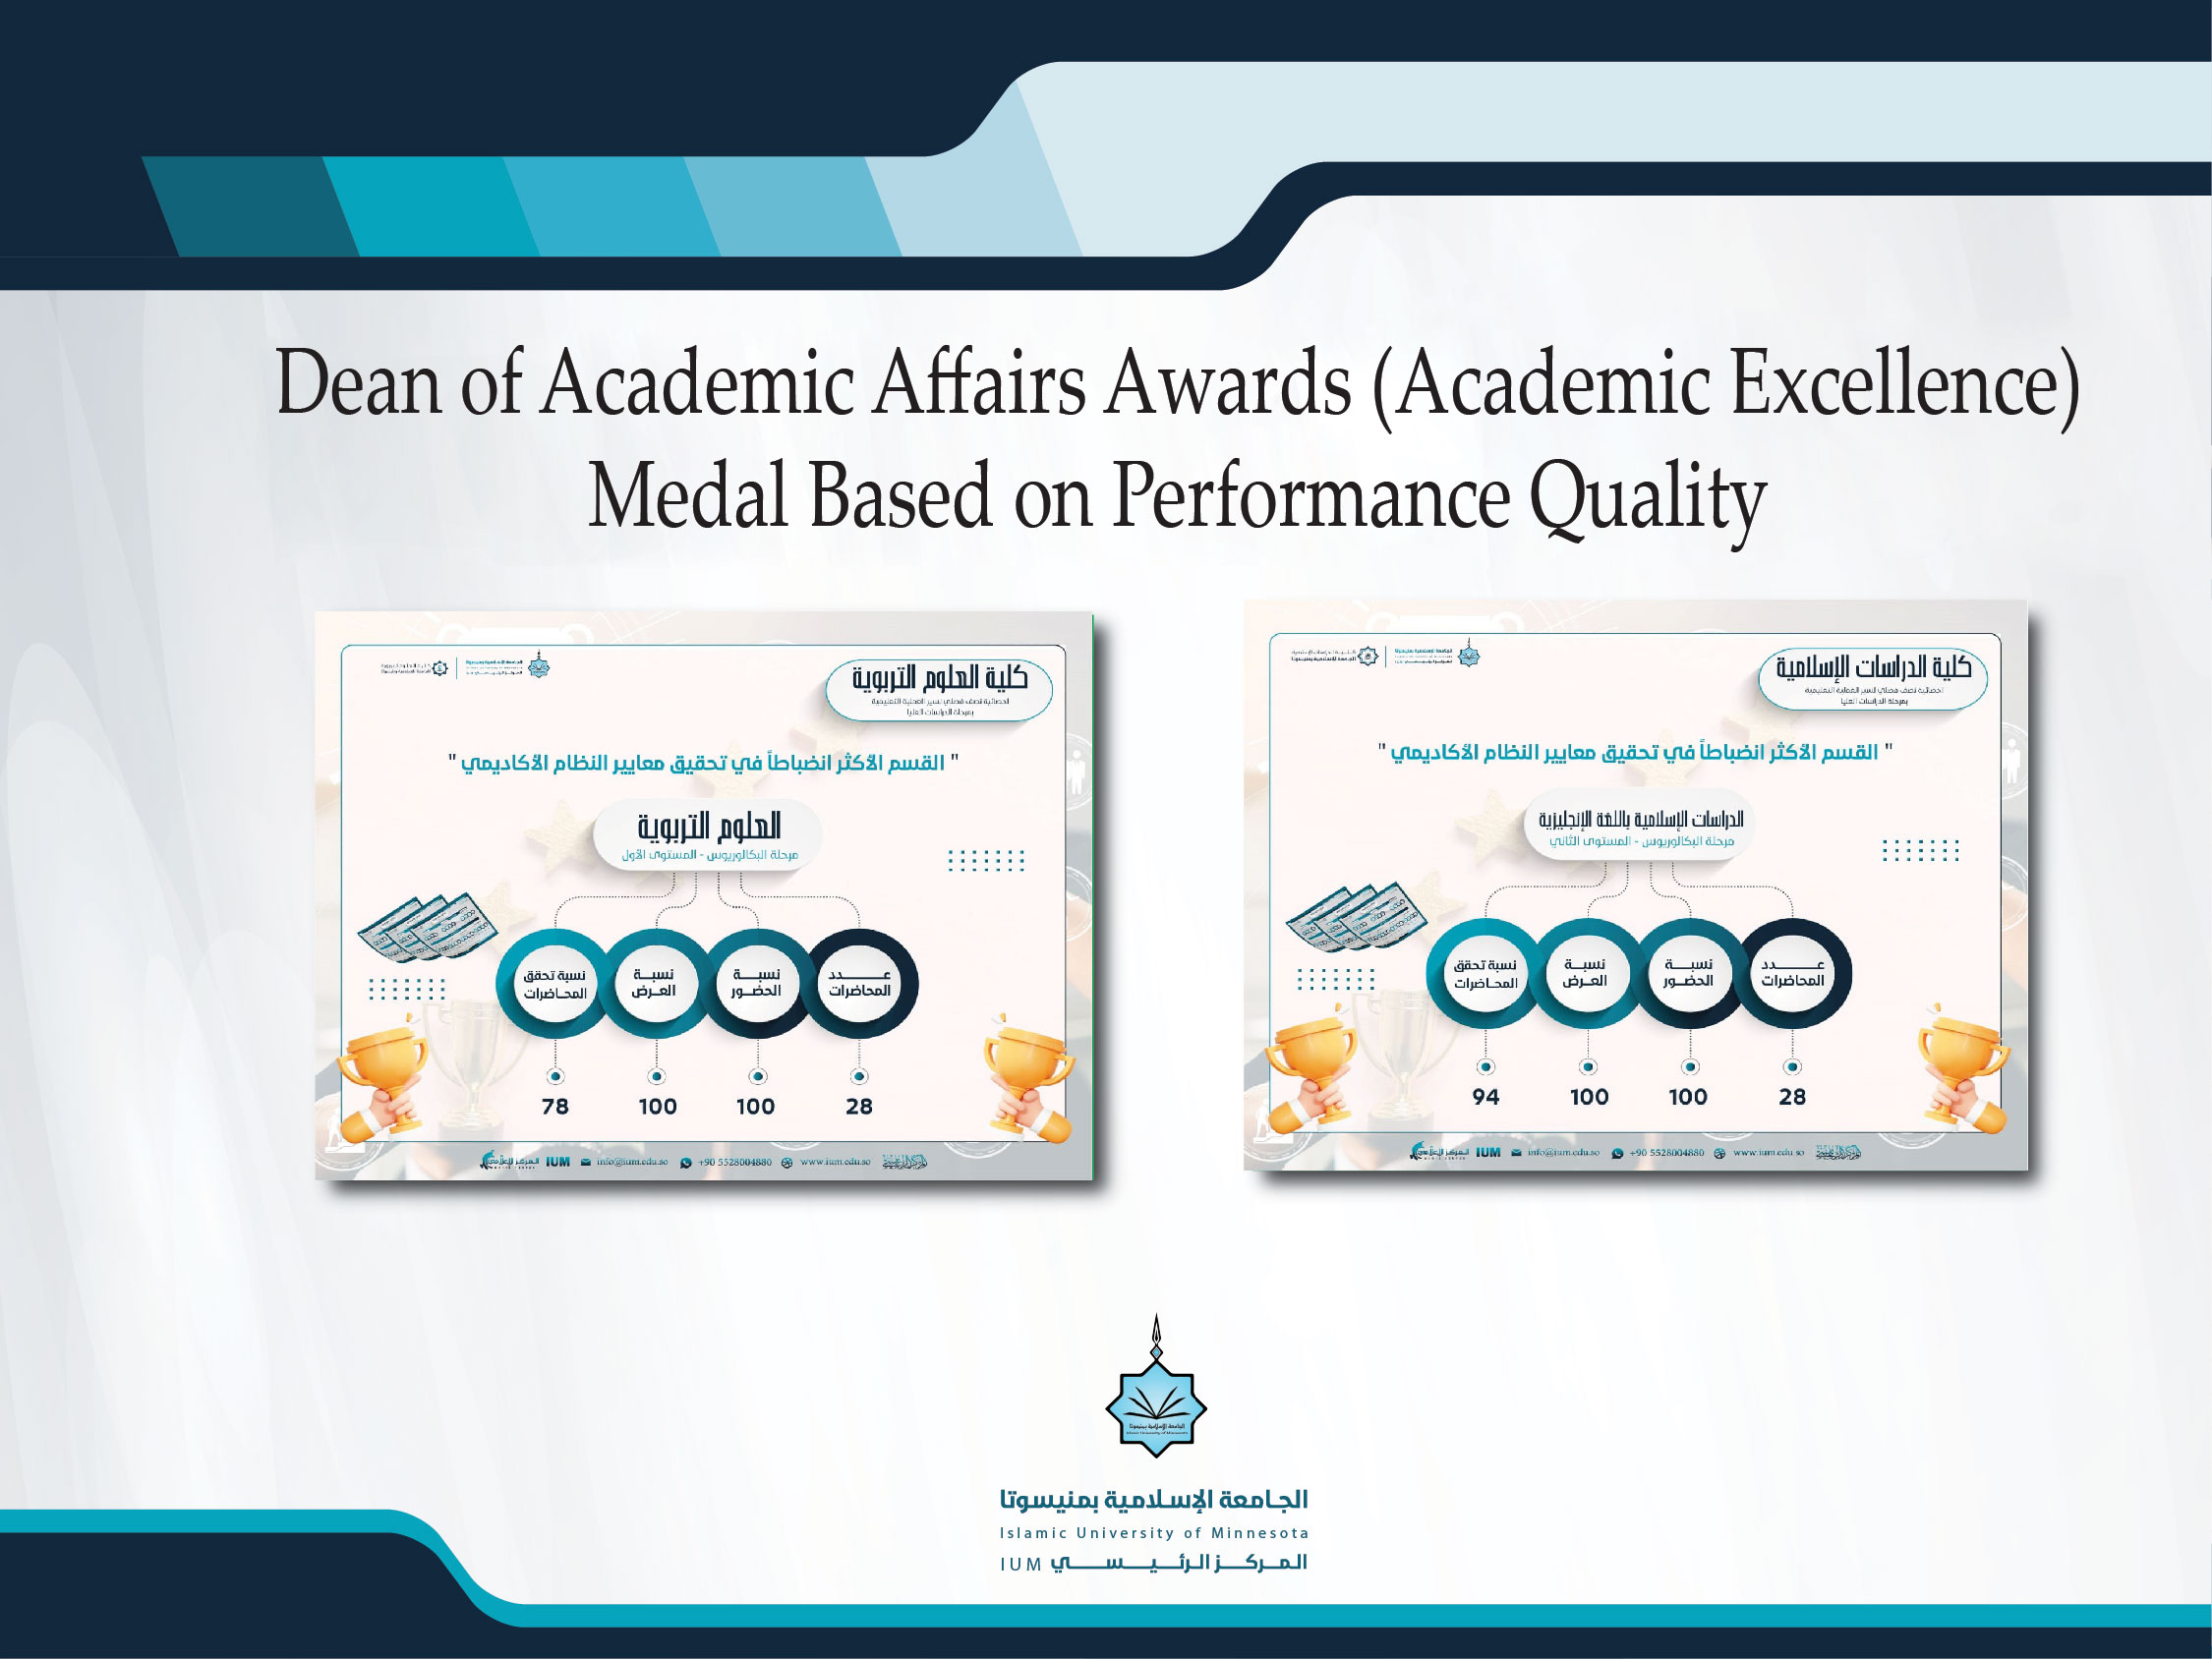 Dean of Academic Affairs Awards (Academic Excellence) Medal Based on Performance Quality